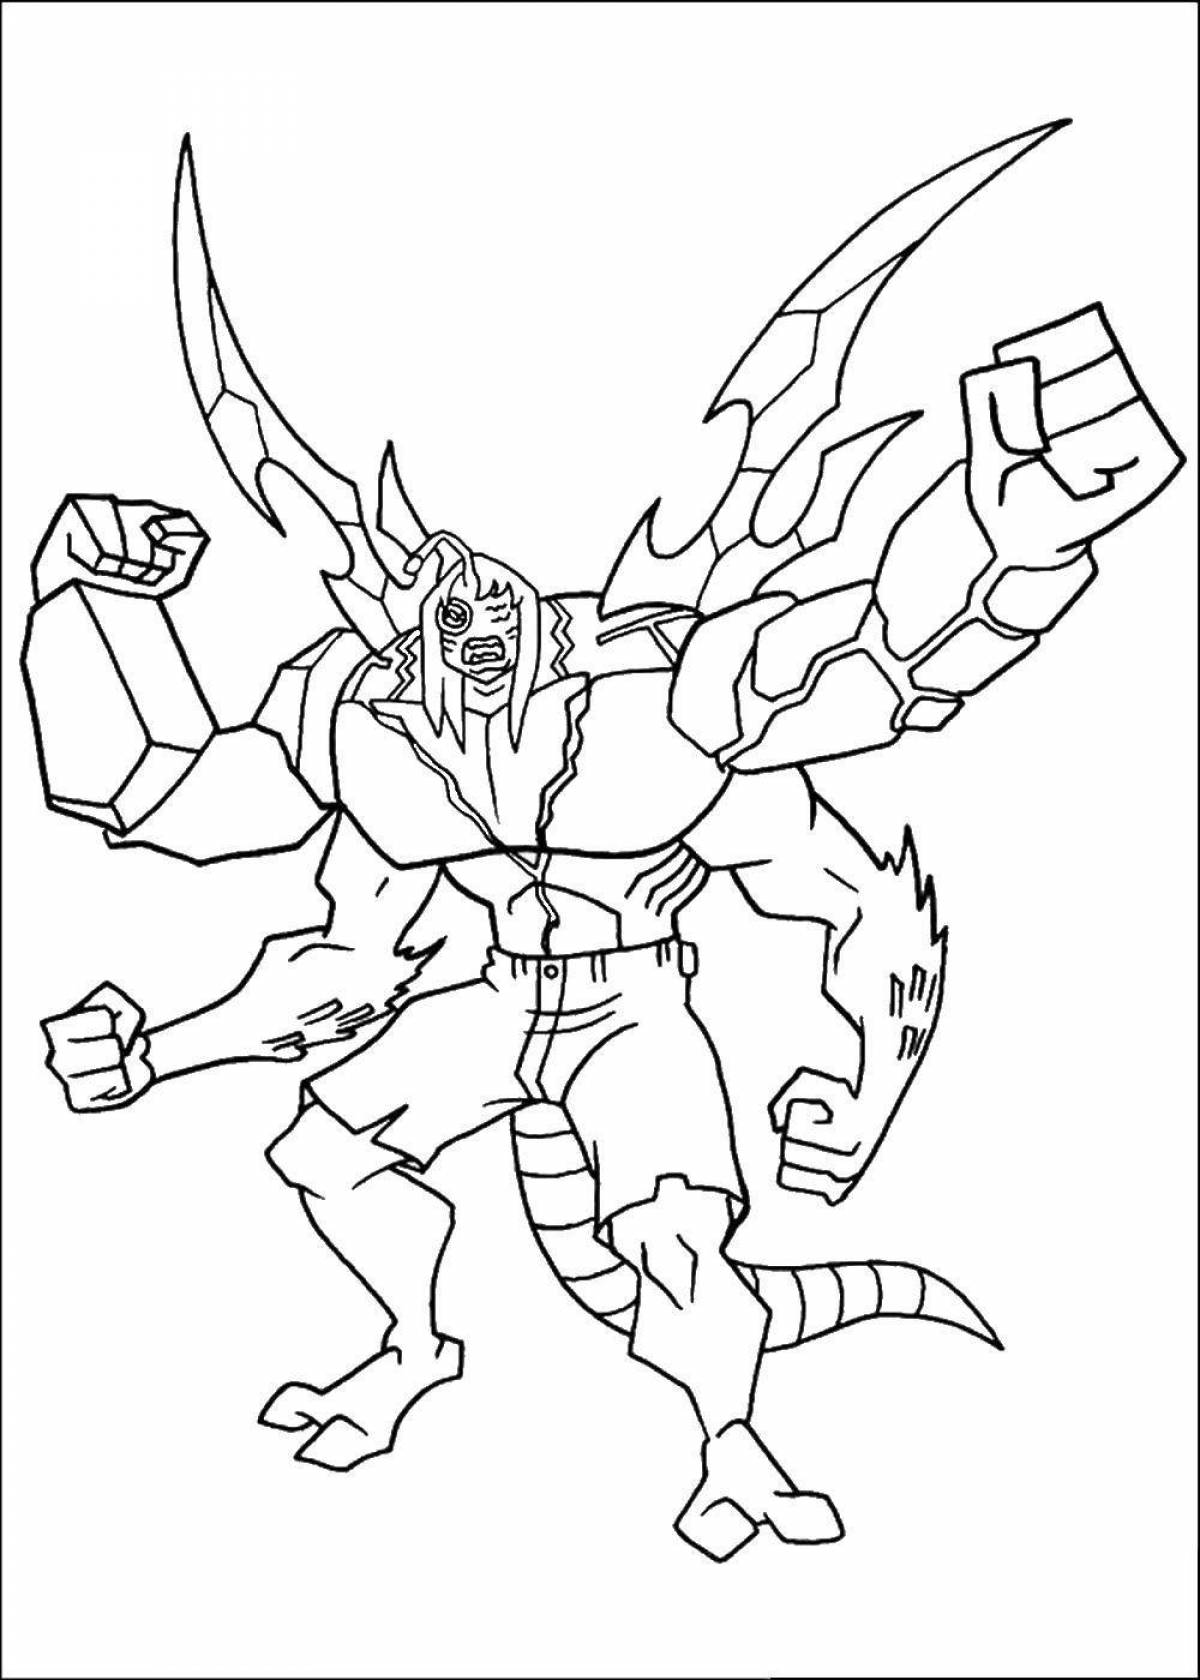 Coloring pages for 10 year old boys